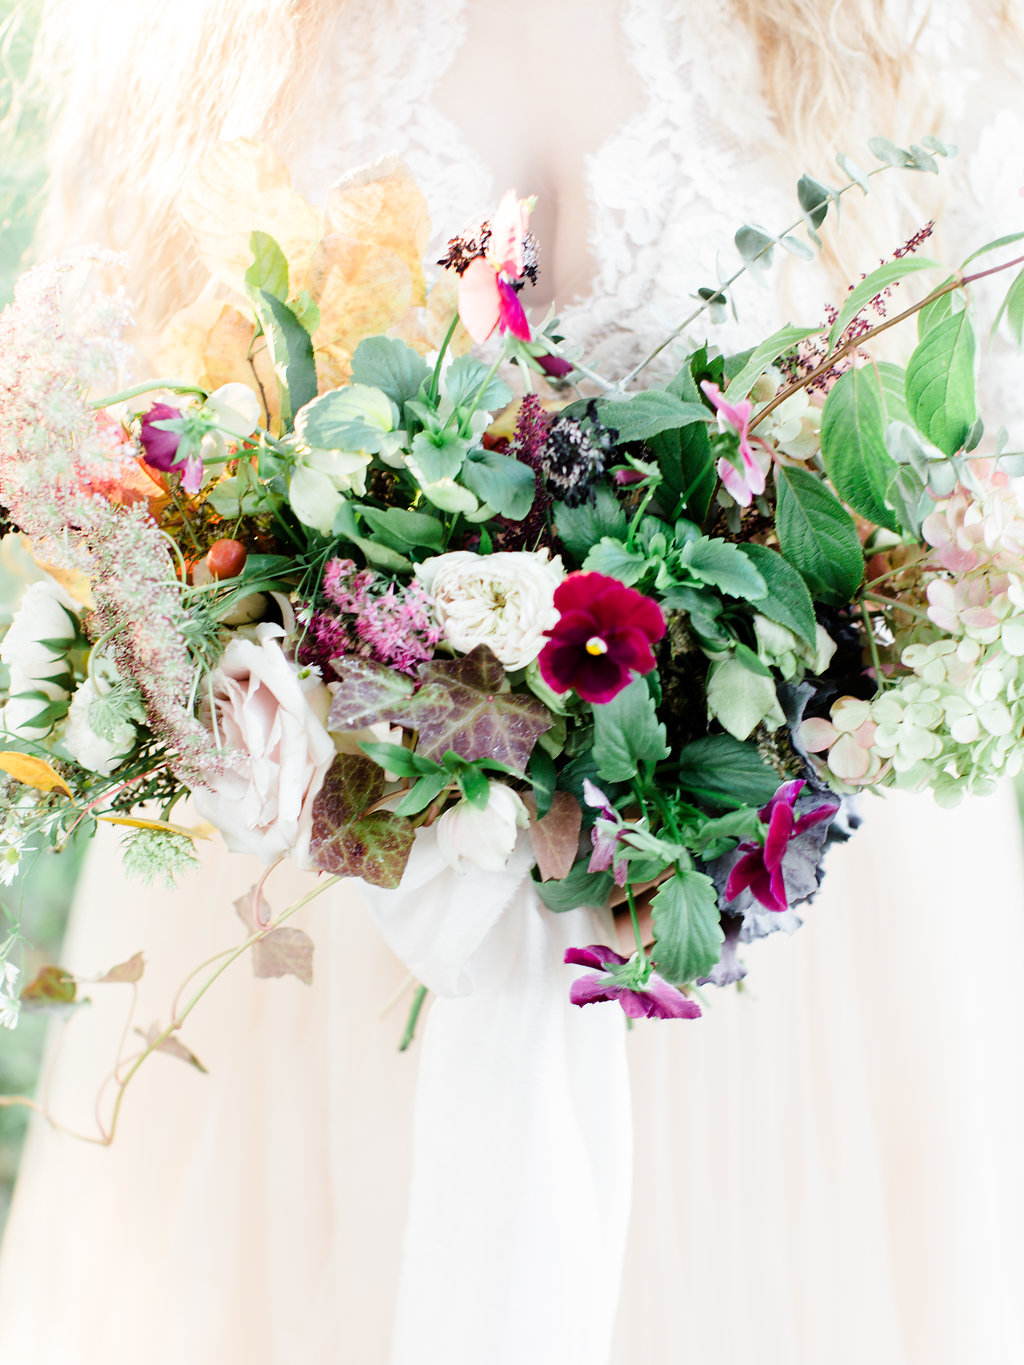 Plum Bridal Bouquet | The Day's Design | Ashley Slater Photography